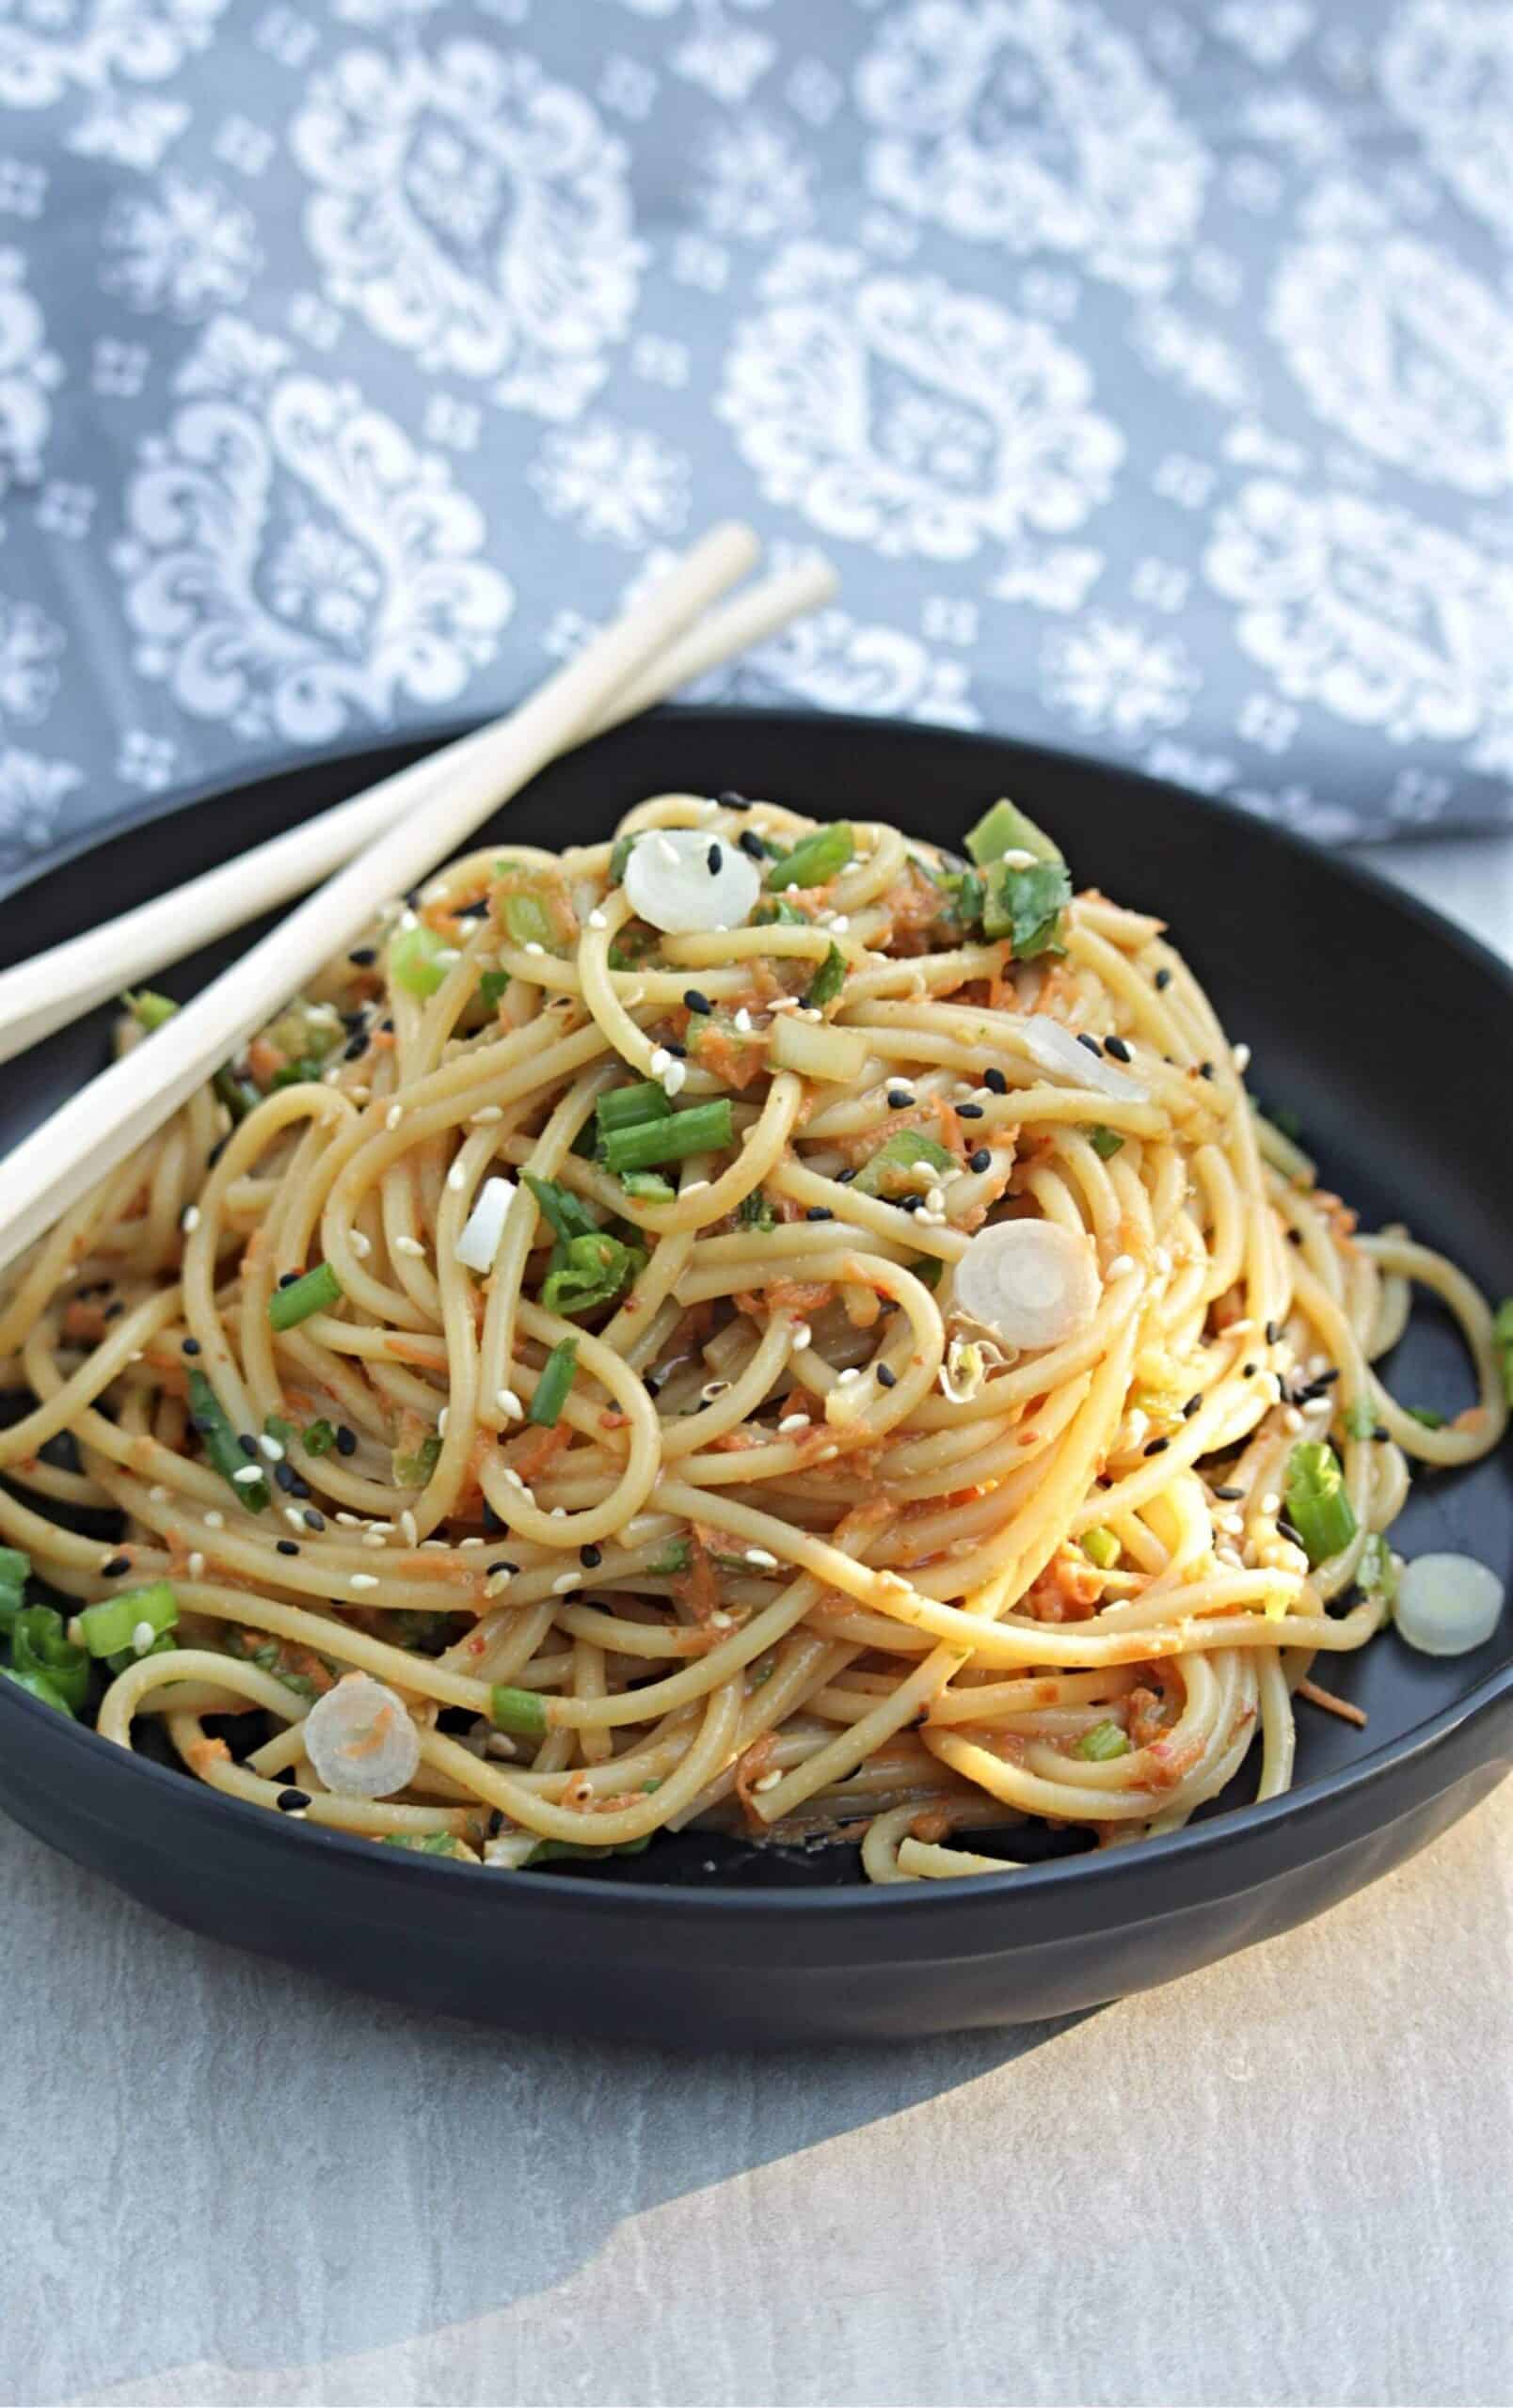 Asian Pasta Salad with spicy peanut dressing